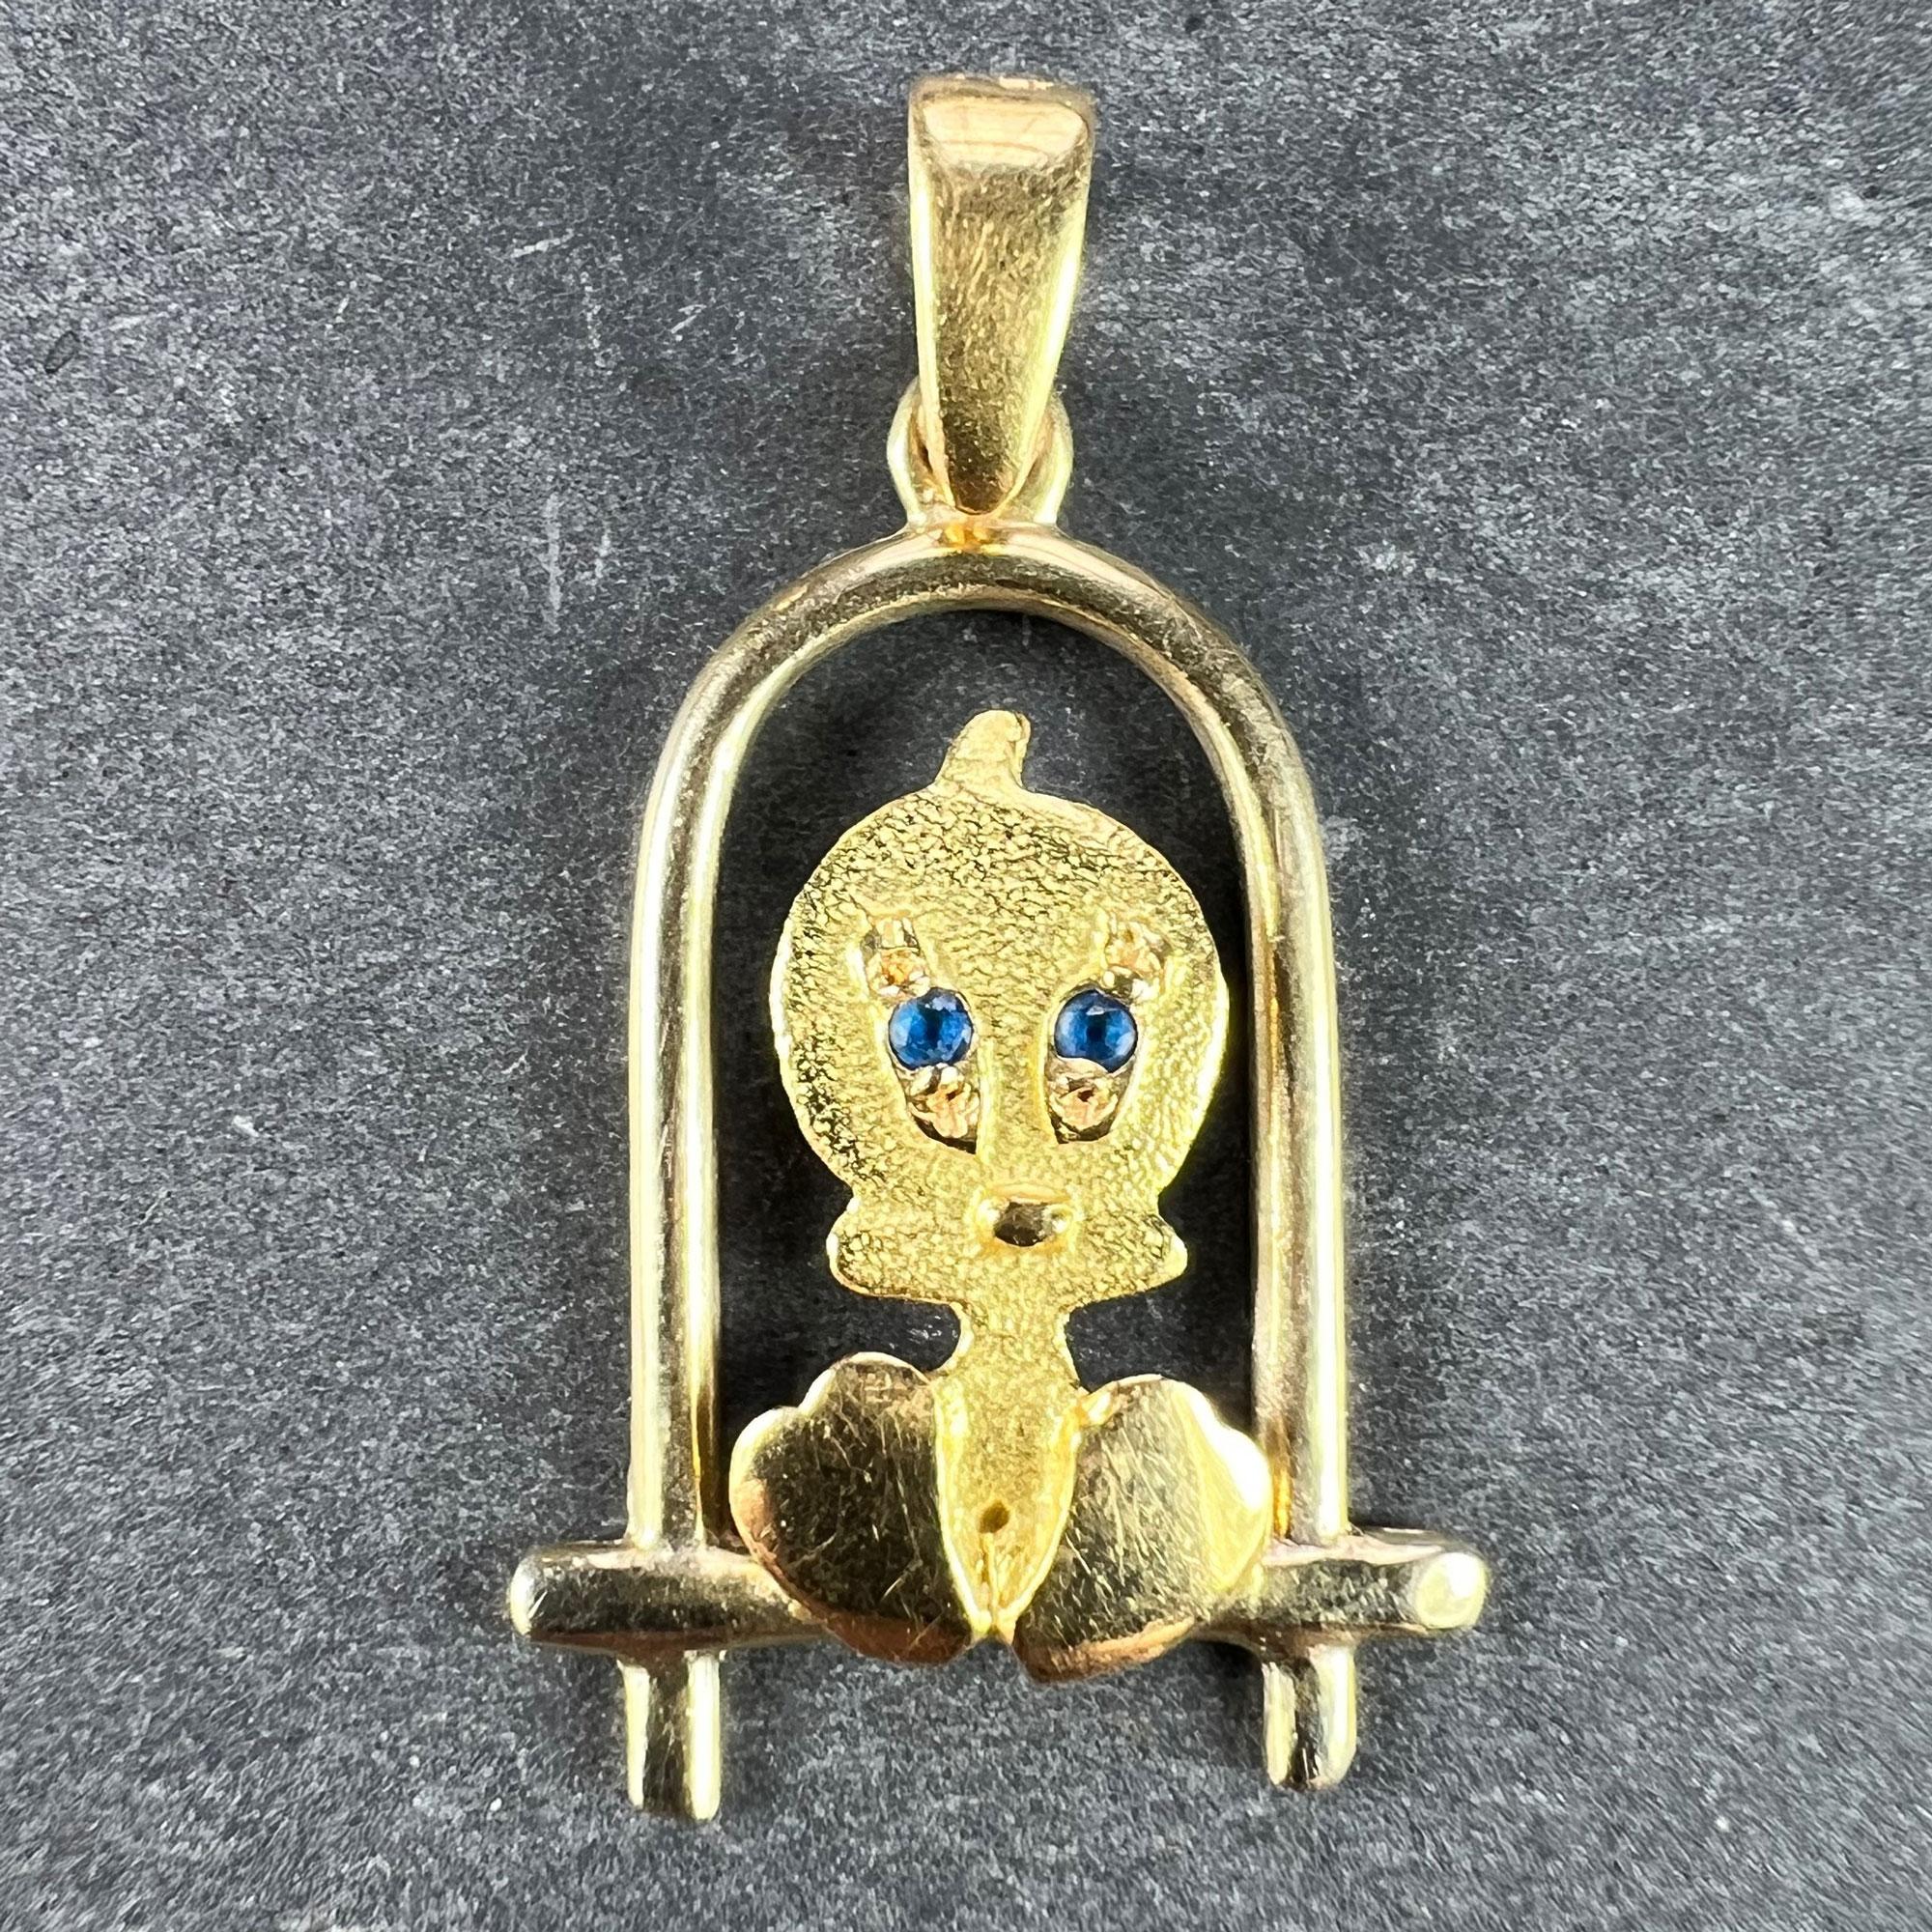 An 18 karat (18K) yellow gold charm pendant designed as a cartoon character bird on a perch with blue paste eyes. Stamped 750 to the pendant bail for 18 karat gold.

Dimensions: 2.4 x 1.5 x 0.25 cm (not including jump ring)
Weight: 1.61 grams
(Chain